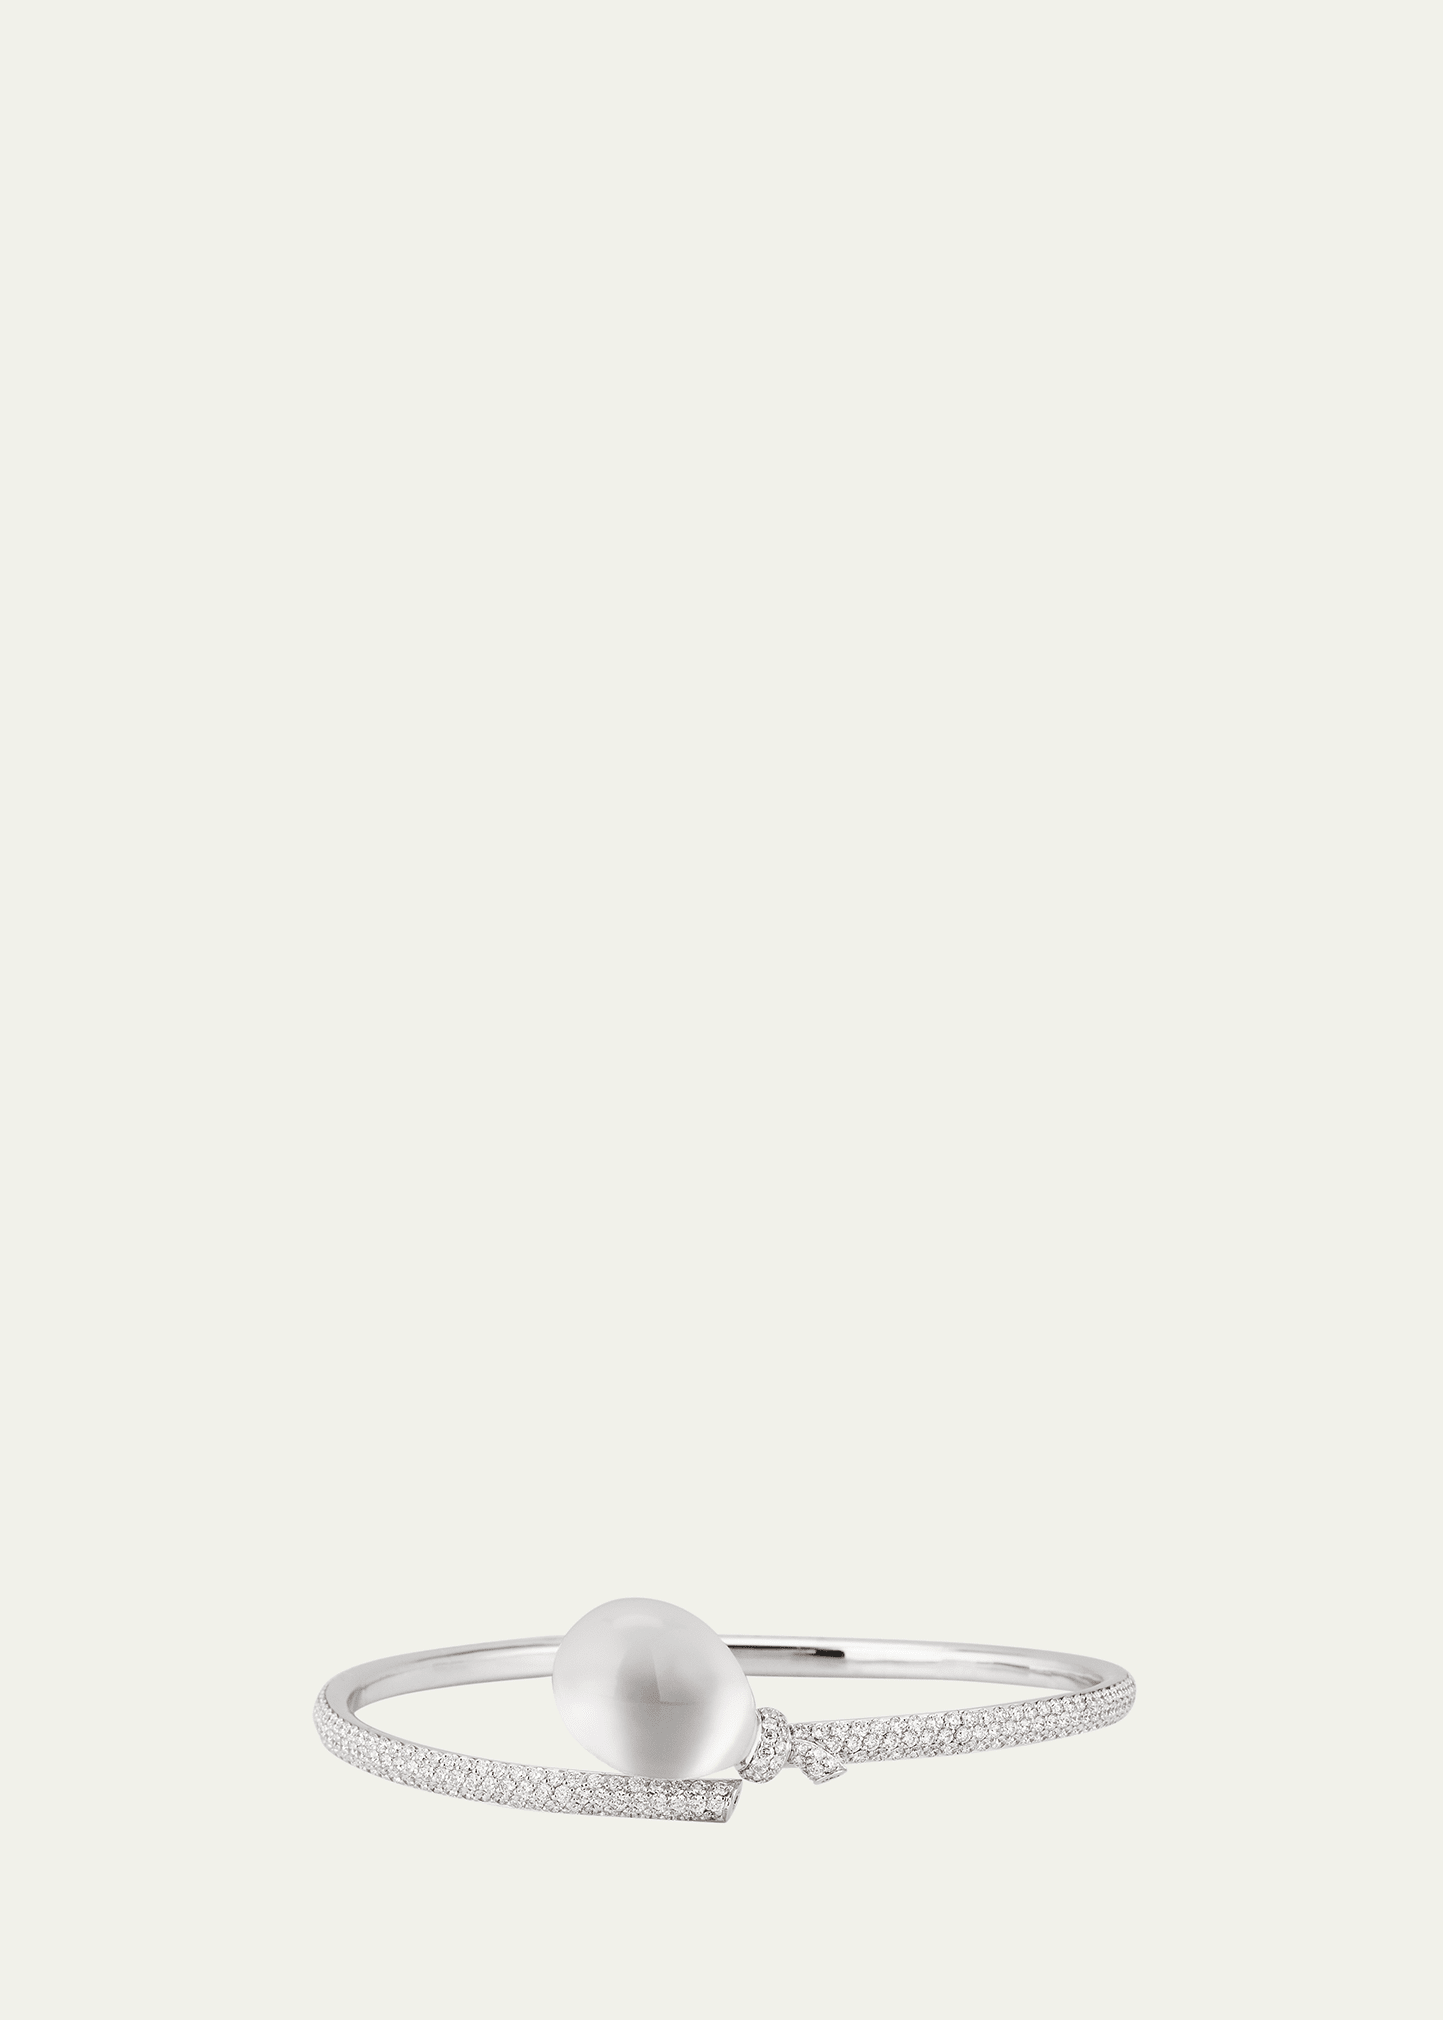 Vhernier Palloncini Mini Bracelet With Diamonds, Rock Crystal And Mother-of-pearl